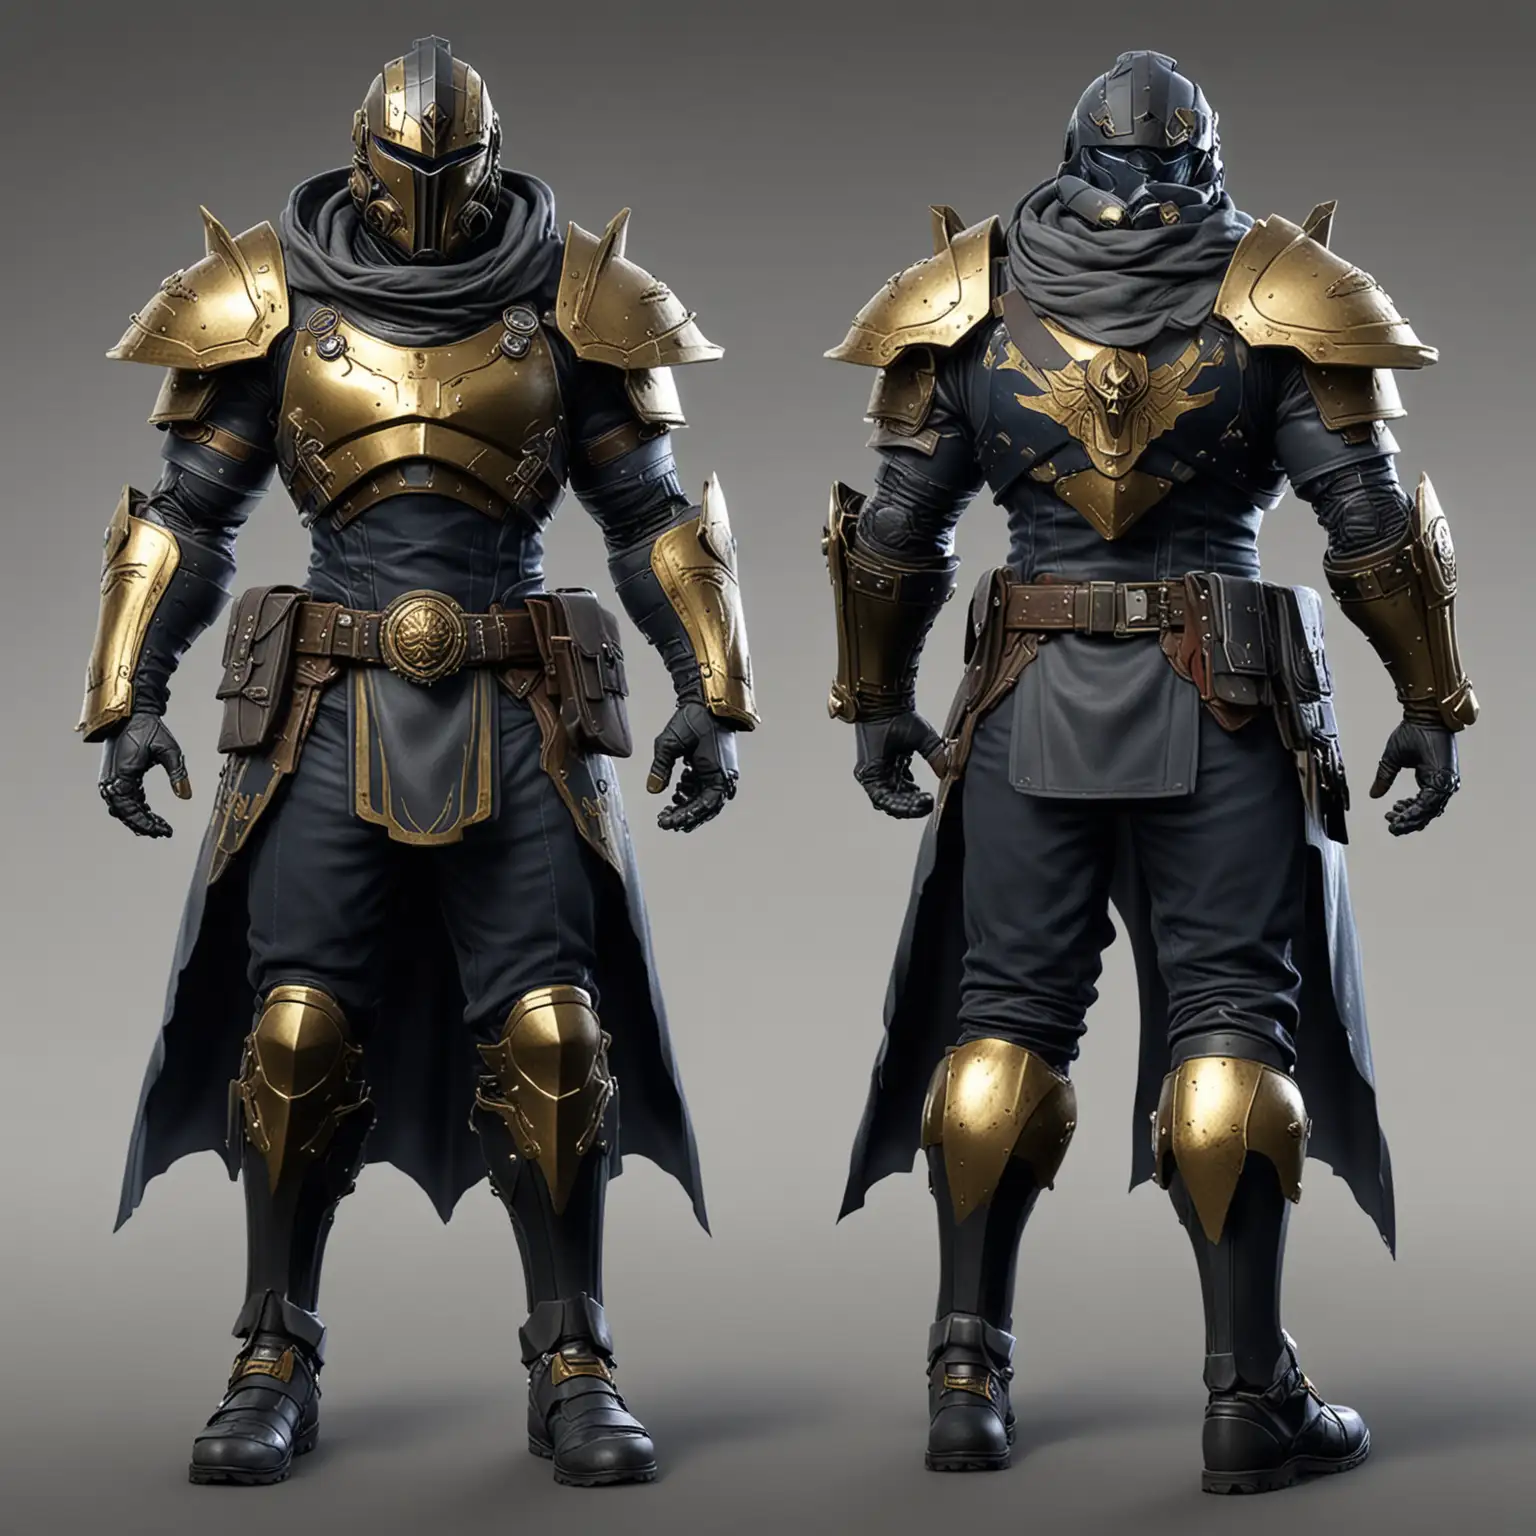 Generate two high-quality images of a character in a front pose and a back pose, ensuring that both poses match each other in terms of positioning and details. The character is a veteran of war in the 'Helldivers 2' universe, with a skinny-build body type and a futuristic style. The character is a ninja-themed Helldiver, wearing intricately carved gold, black, and navy blue colored armor with scratches and armor damage, reminiscent of a Warhammer 40k art style mixed with a Fortnite skin.

The character is adorned with 'purity seals' and medals all over the armor from victories in battles. The character also wears a long, powerful-looking cape that symbolizes freedom and democracy. The overall design should reflect a Primarch Warhammer 40k Captain with biotech elements. The images should showcase the character's detailed armor, cape, and overall aesthetic, capturing the essence of a battle-hardened warrior in a futuristic setting.